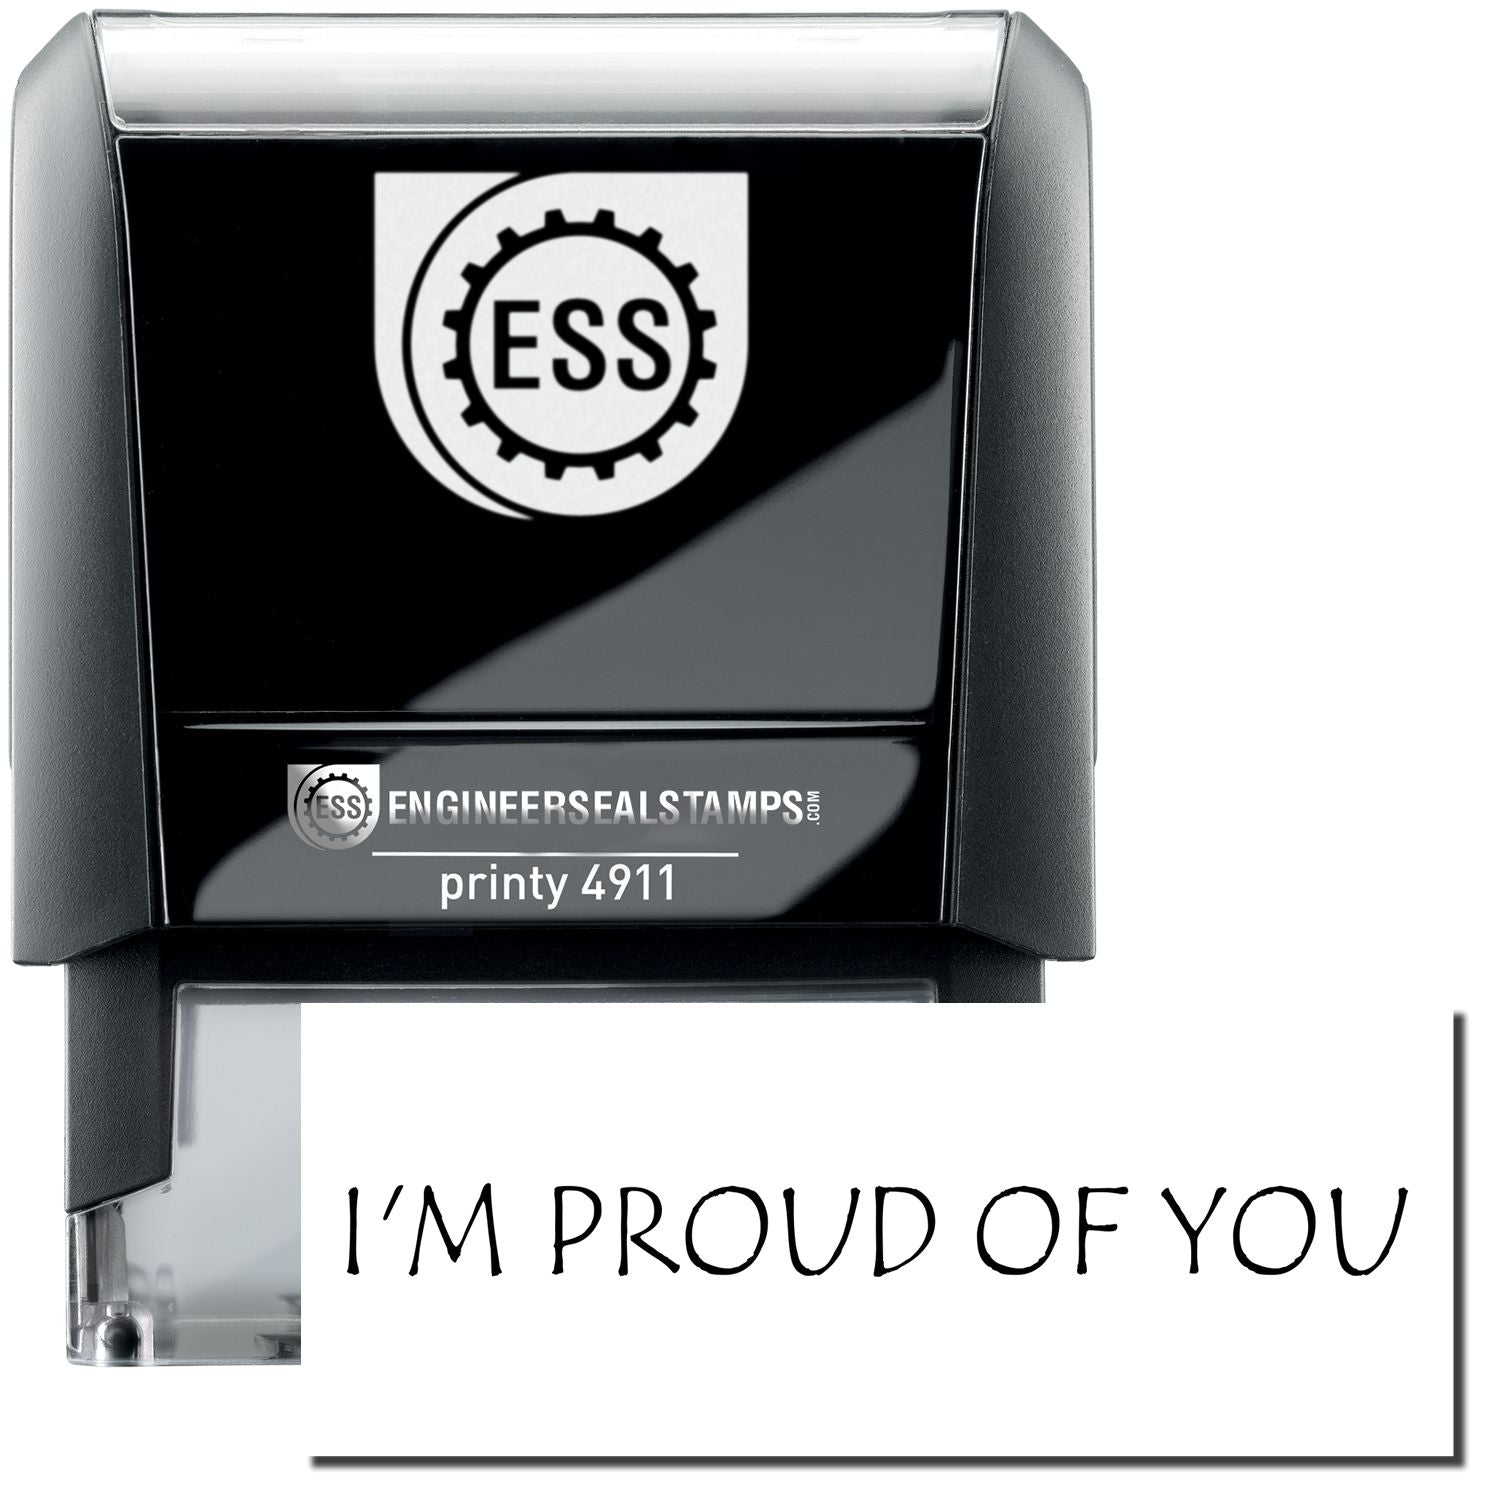 A self-inking stamp with a stamped image showing how the text "I'M PROUD OF YOU" is displayed after stamping.